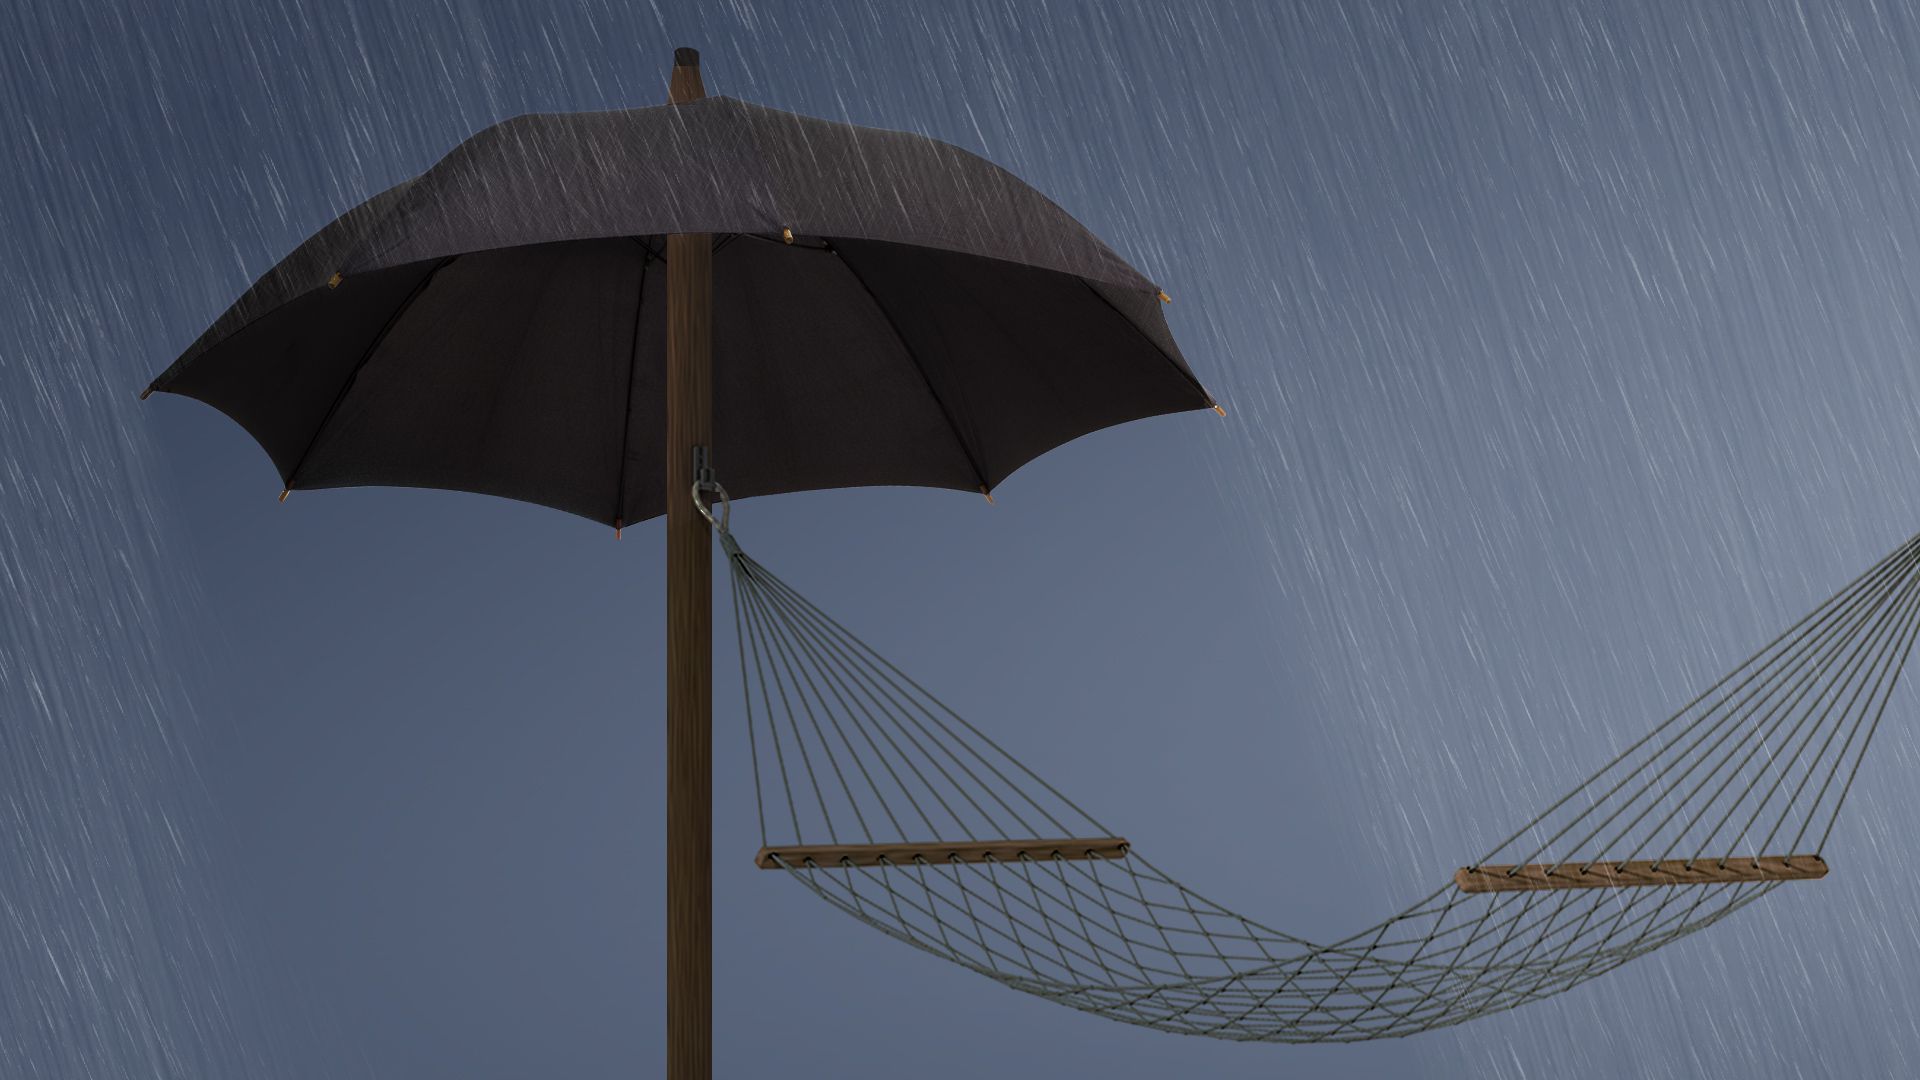 Illustration of a hammock in the rain, shielded by an umbrella.